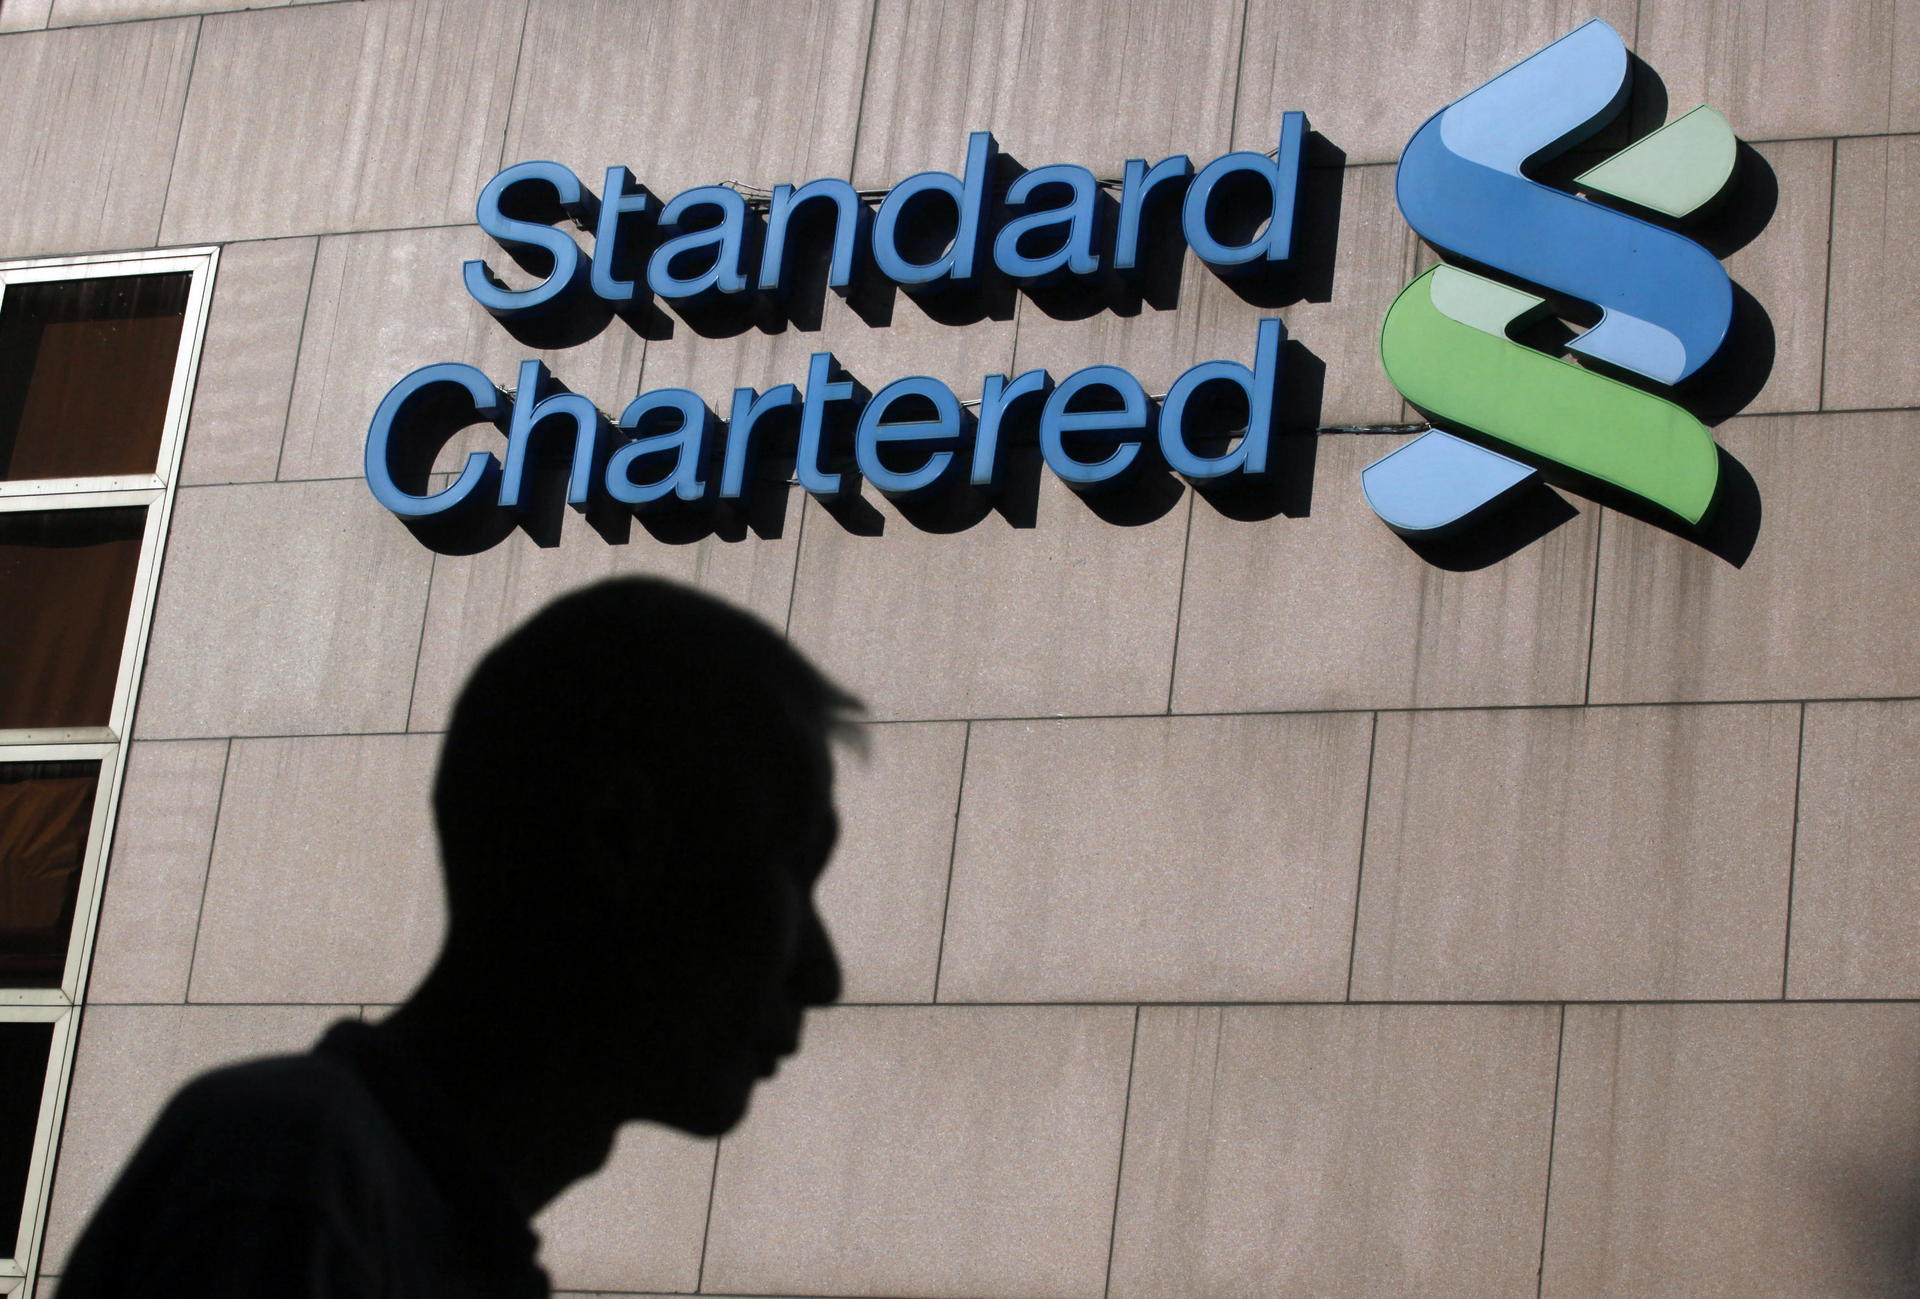 Management at Standard Chartered is keeping up a positive outlook, but some analysts have doubts the Asia-focused lender can get growth back on track. Photo: AP